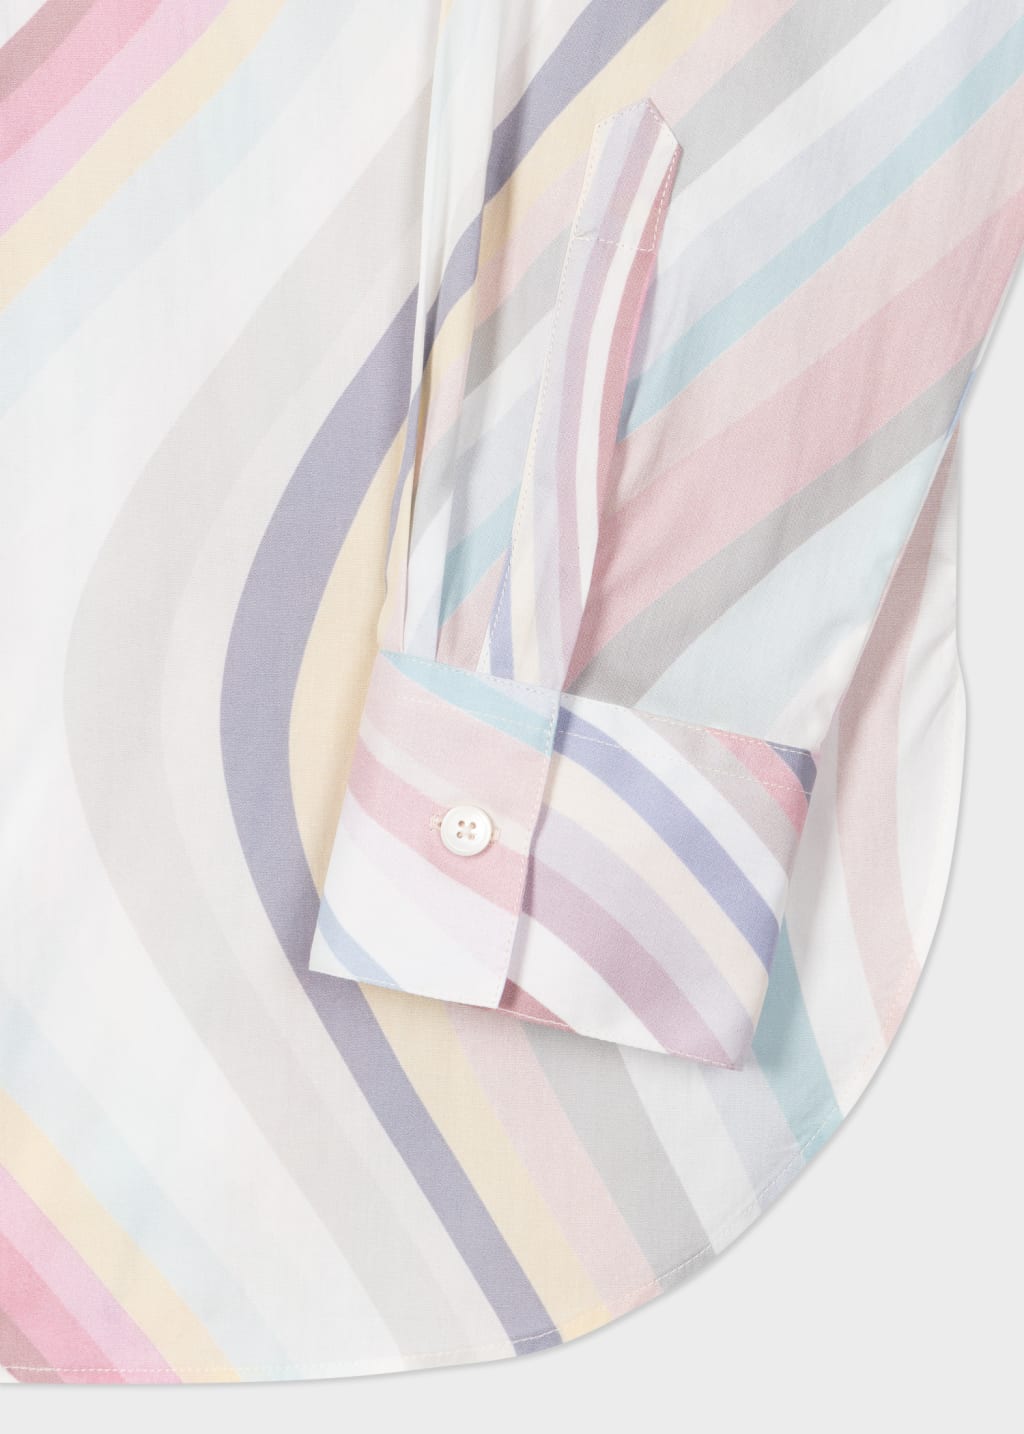 Product View - Women's Faded 'Swirl' Cotton Shirt by Paul Smith